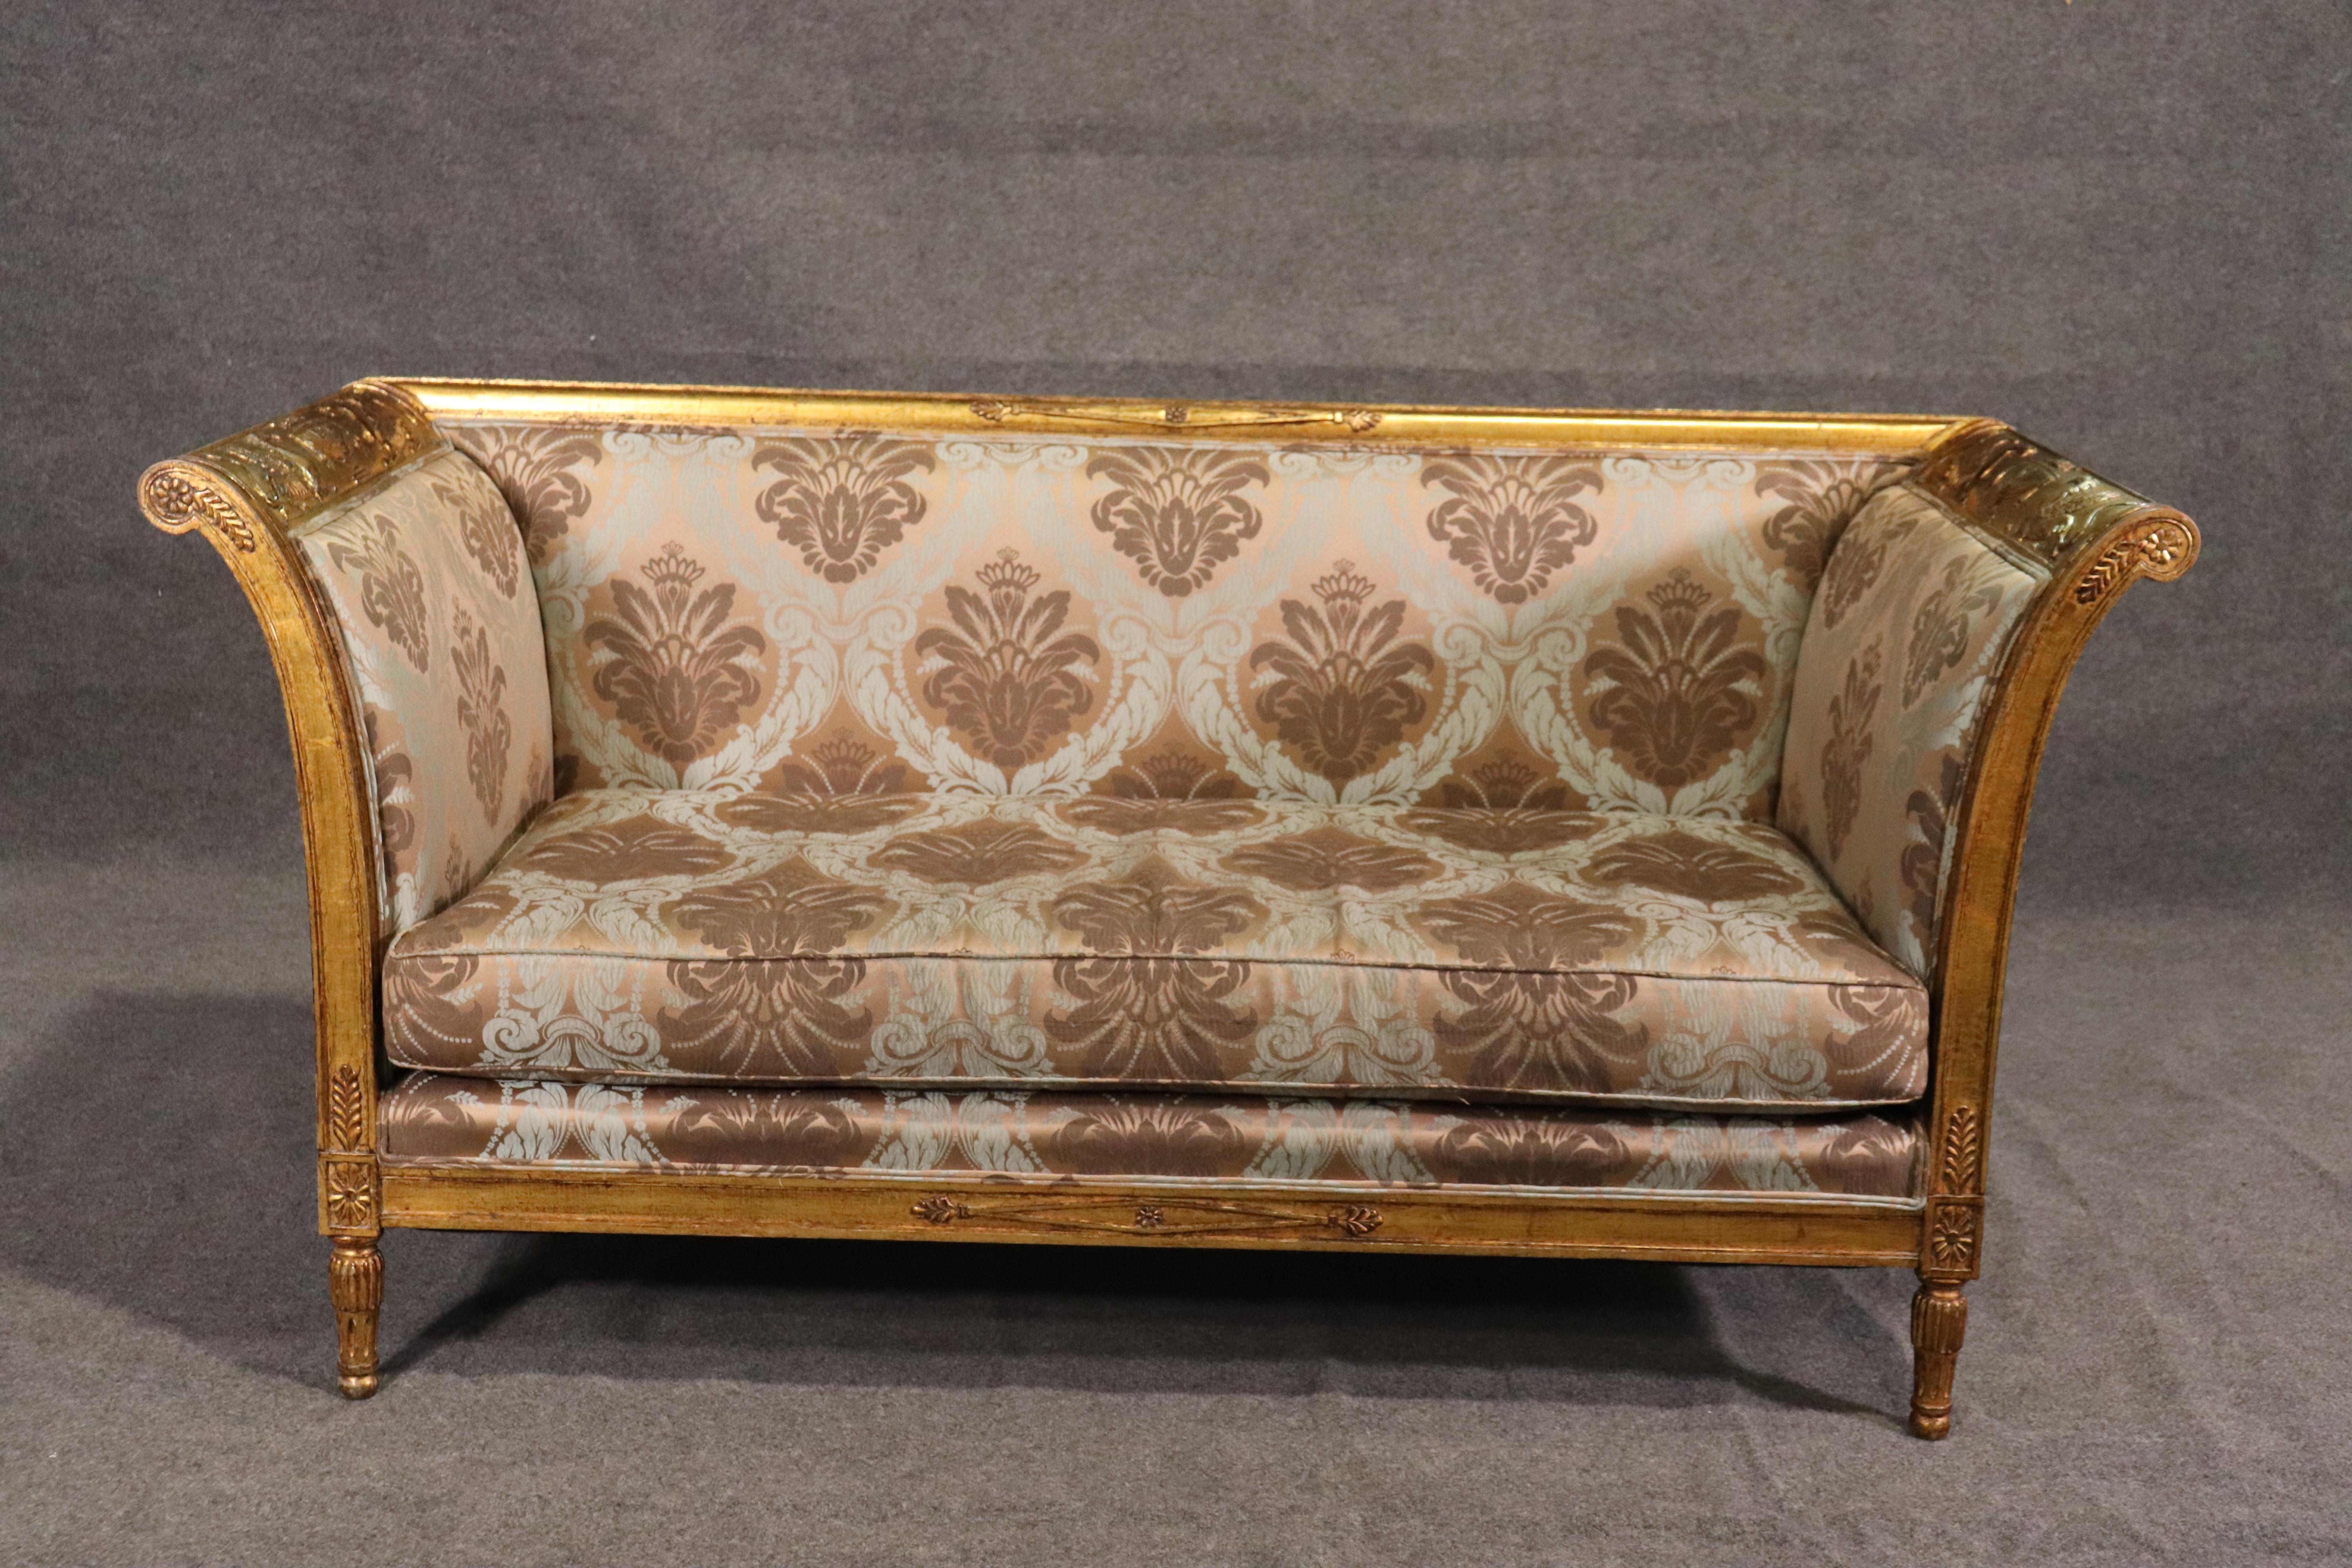 This is a fantastic pair of French Directoire style, Italian-made settees or sofas. They are each carved with griffins and traditional French element and graceful taste. The frames are beautifully carved and layered on genuine distressed gold leaf